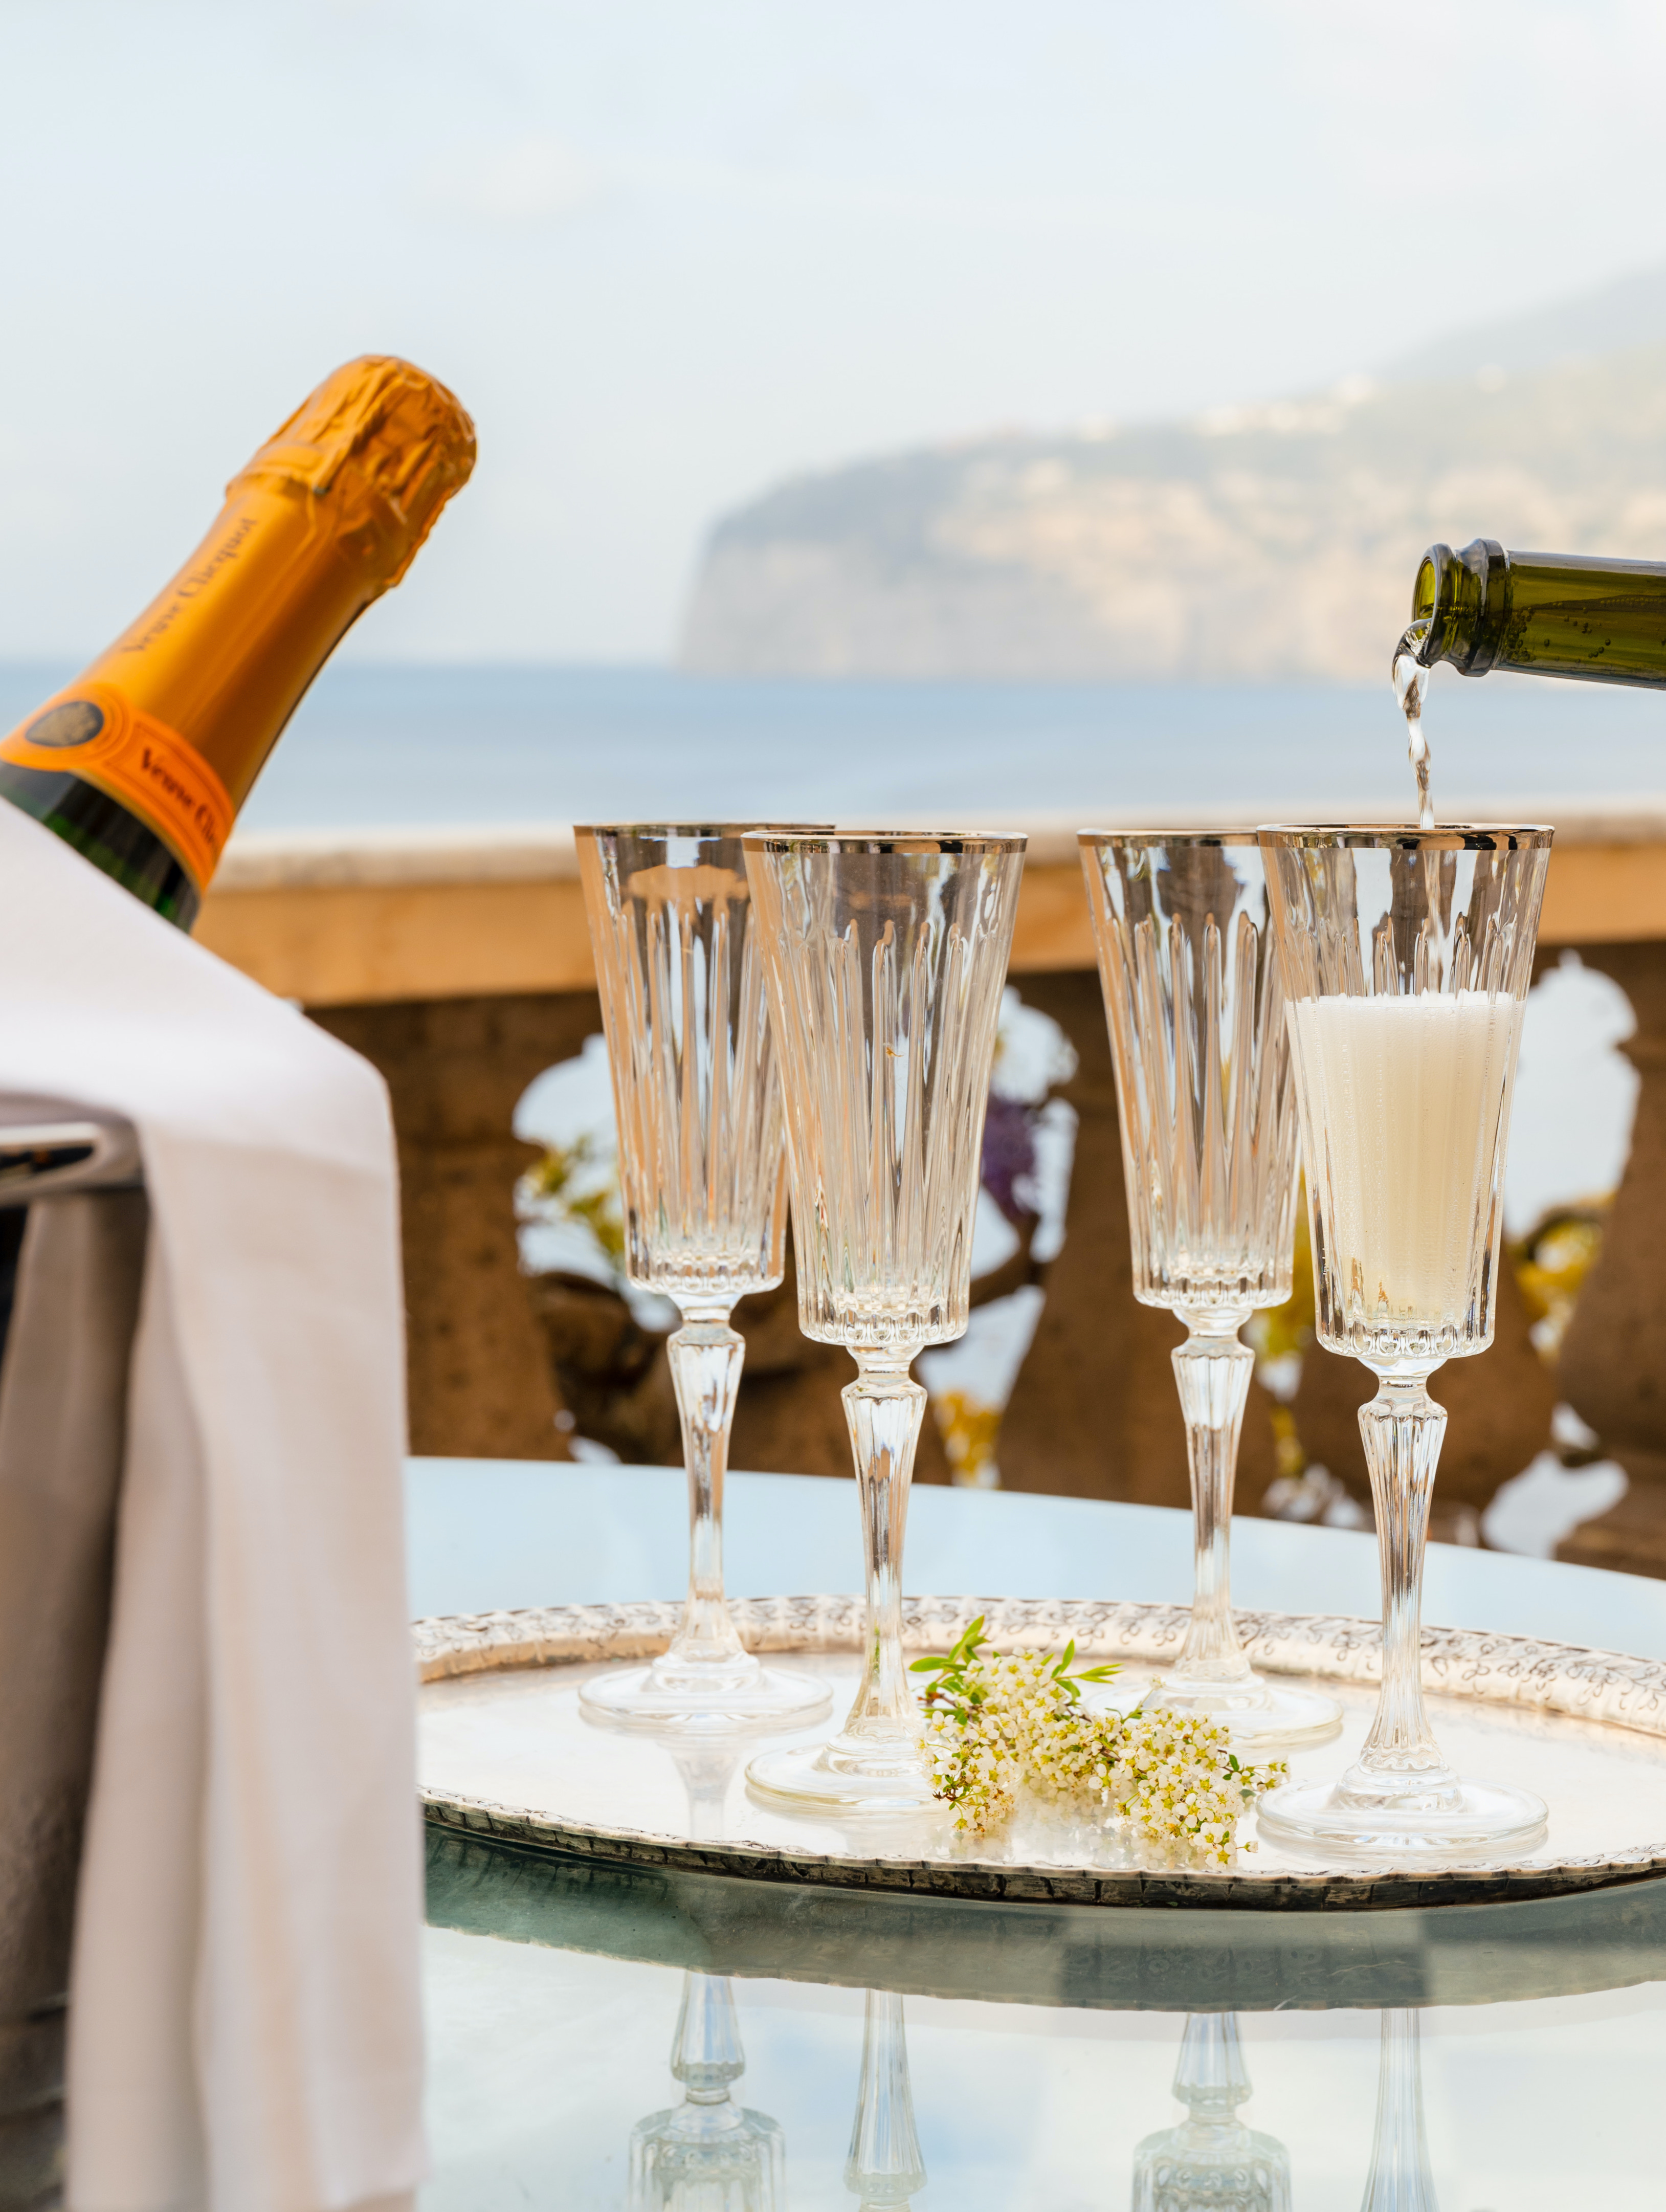 Veuve Cliquot champagne is being poured in crystal glasses at a wedding on the Amalfi Coast.